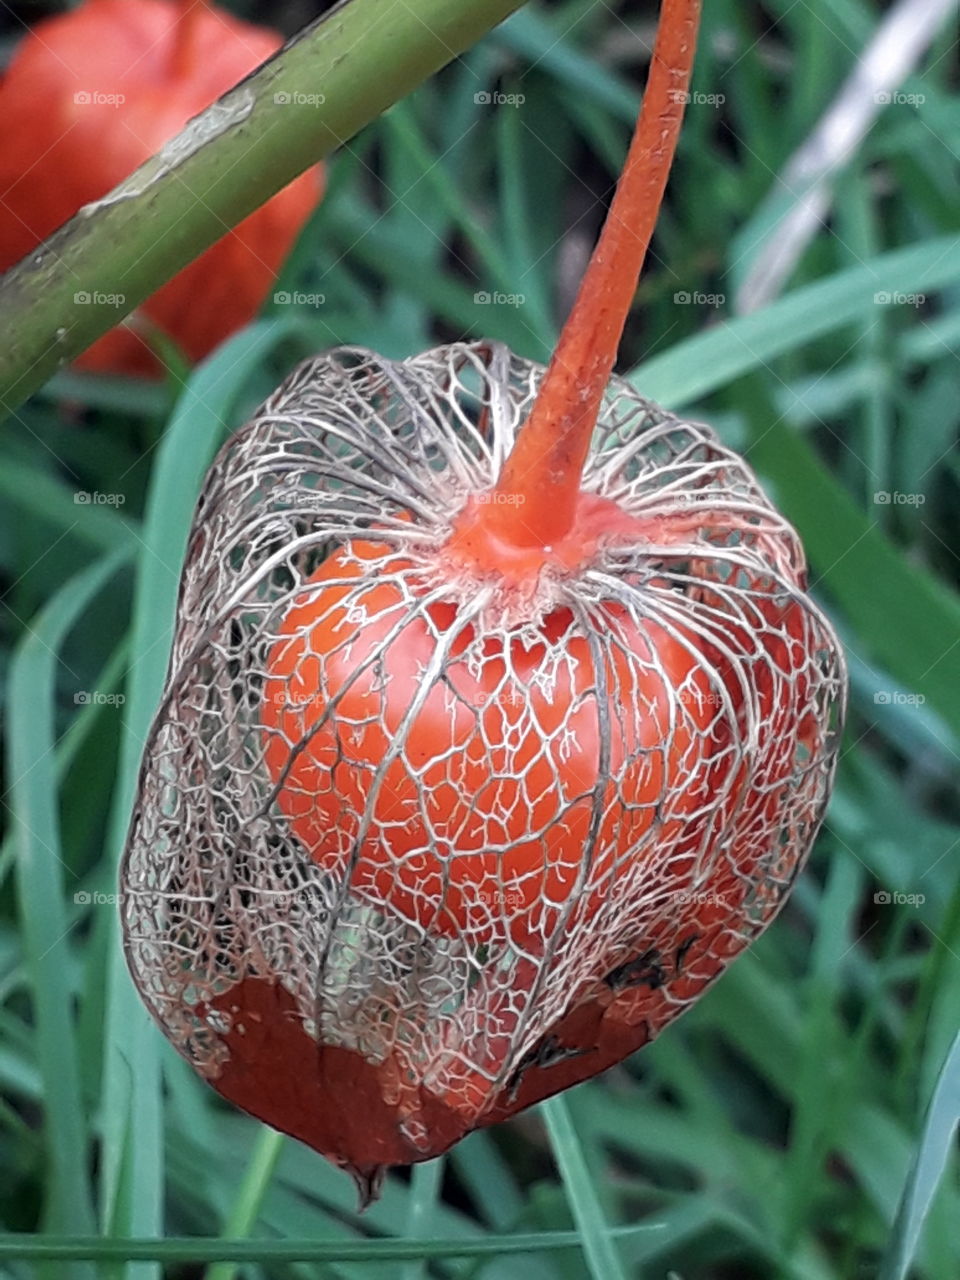 orange seed of bellows with damaged fruit casting